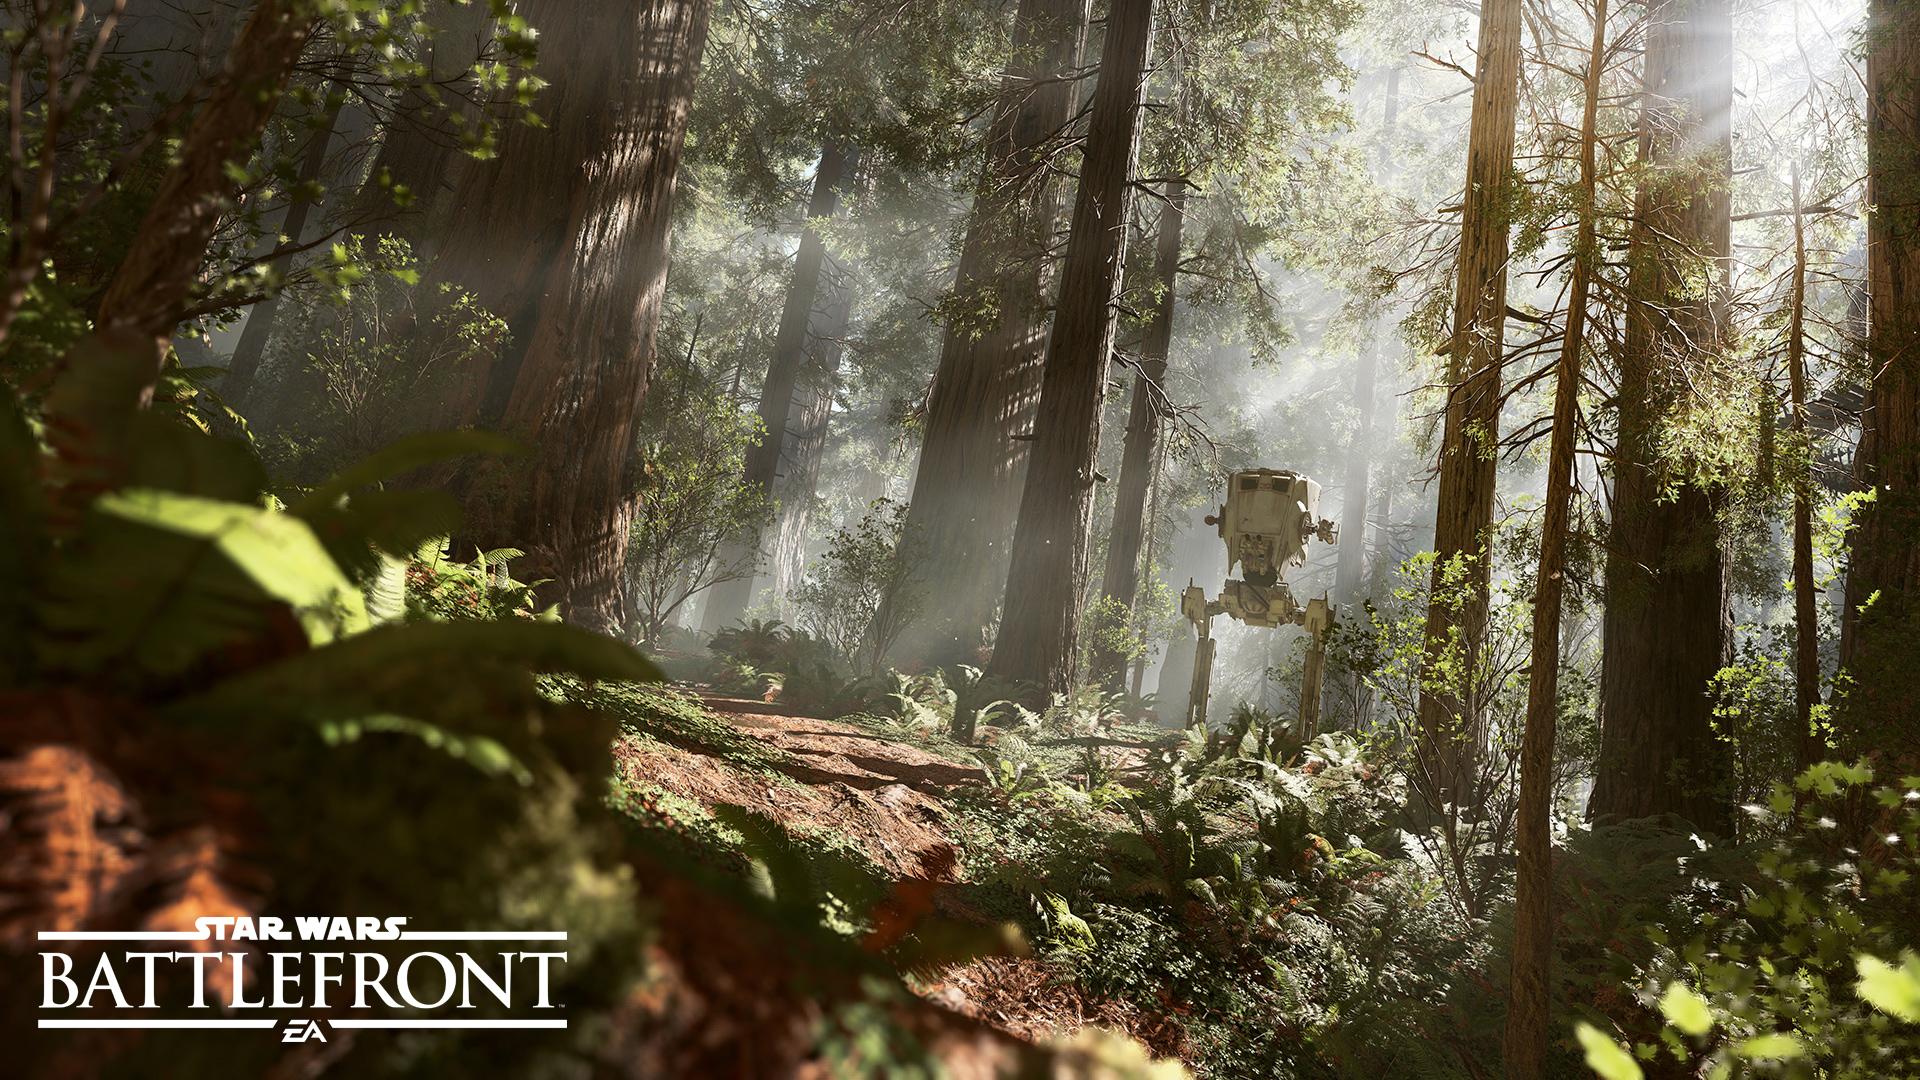 Star Wars Battlefront Screenshot Shows In Game Look At Playable St